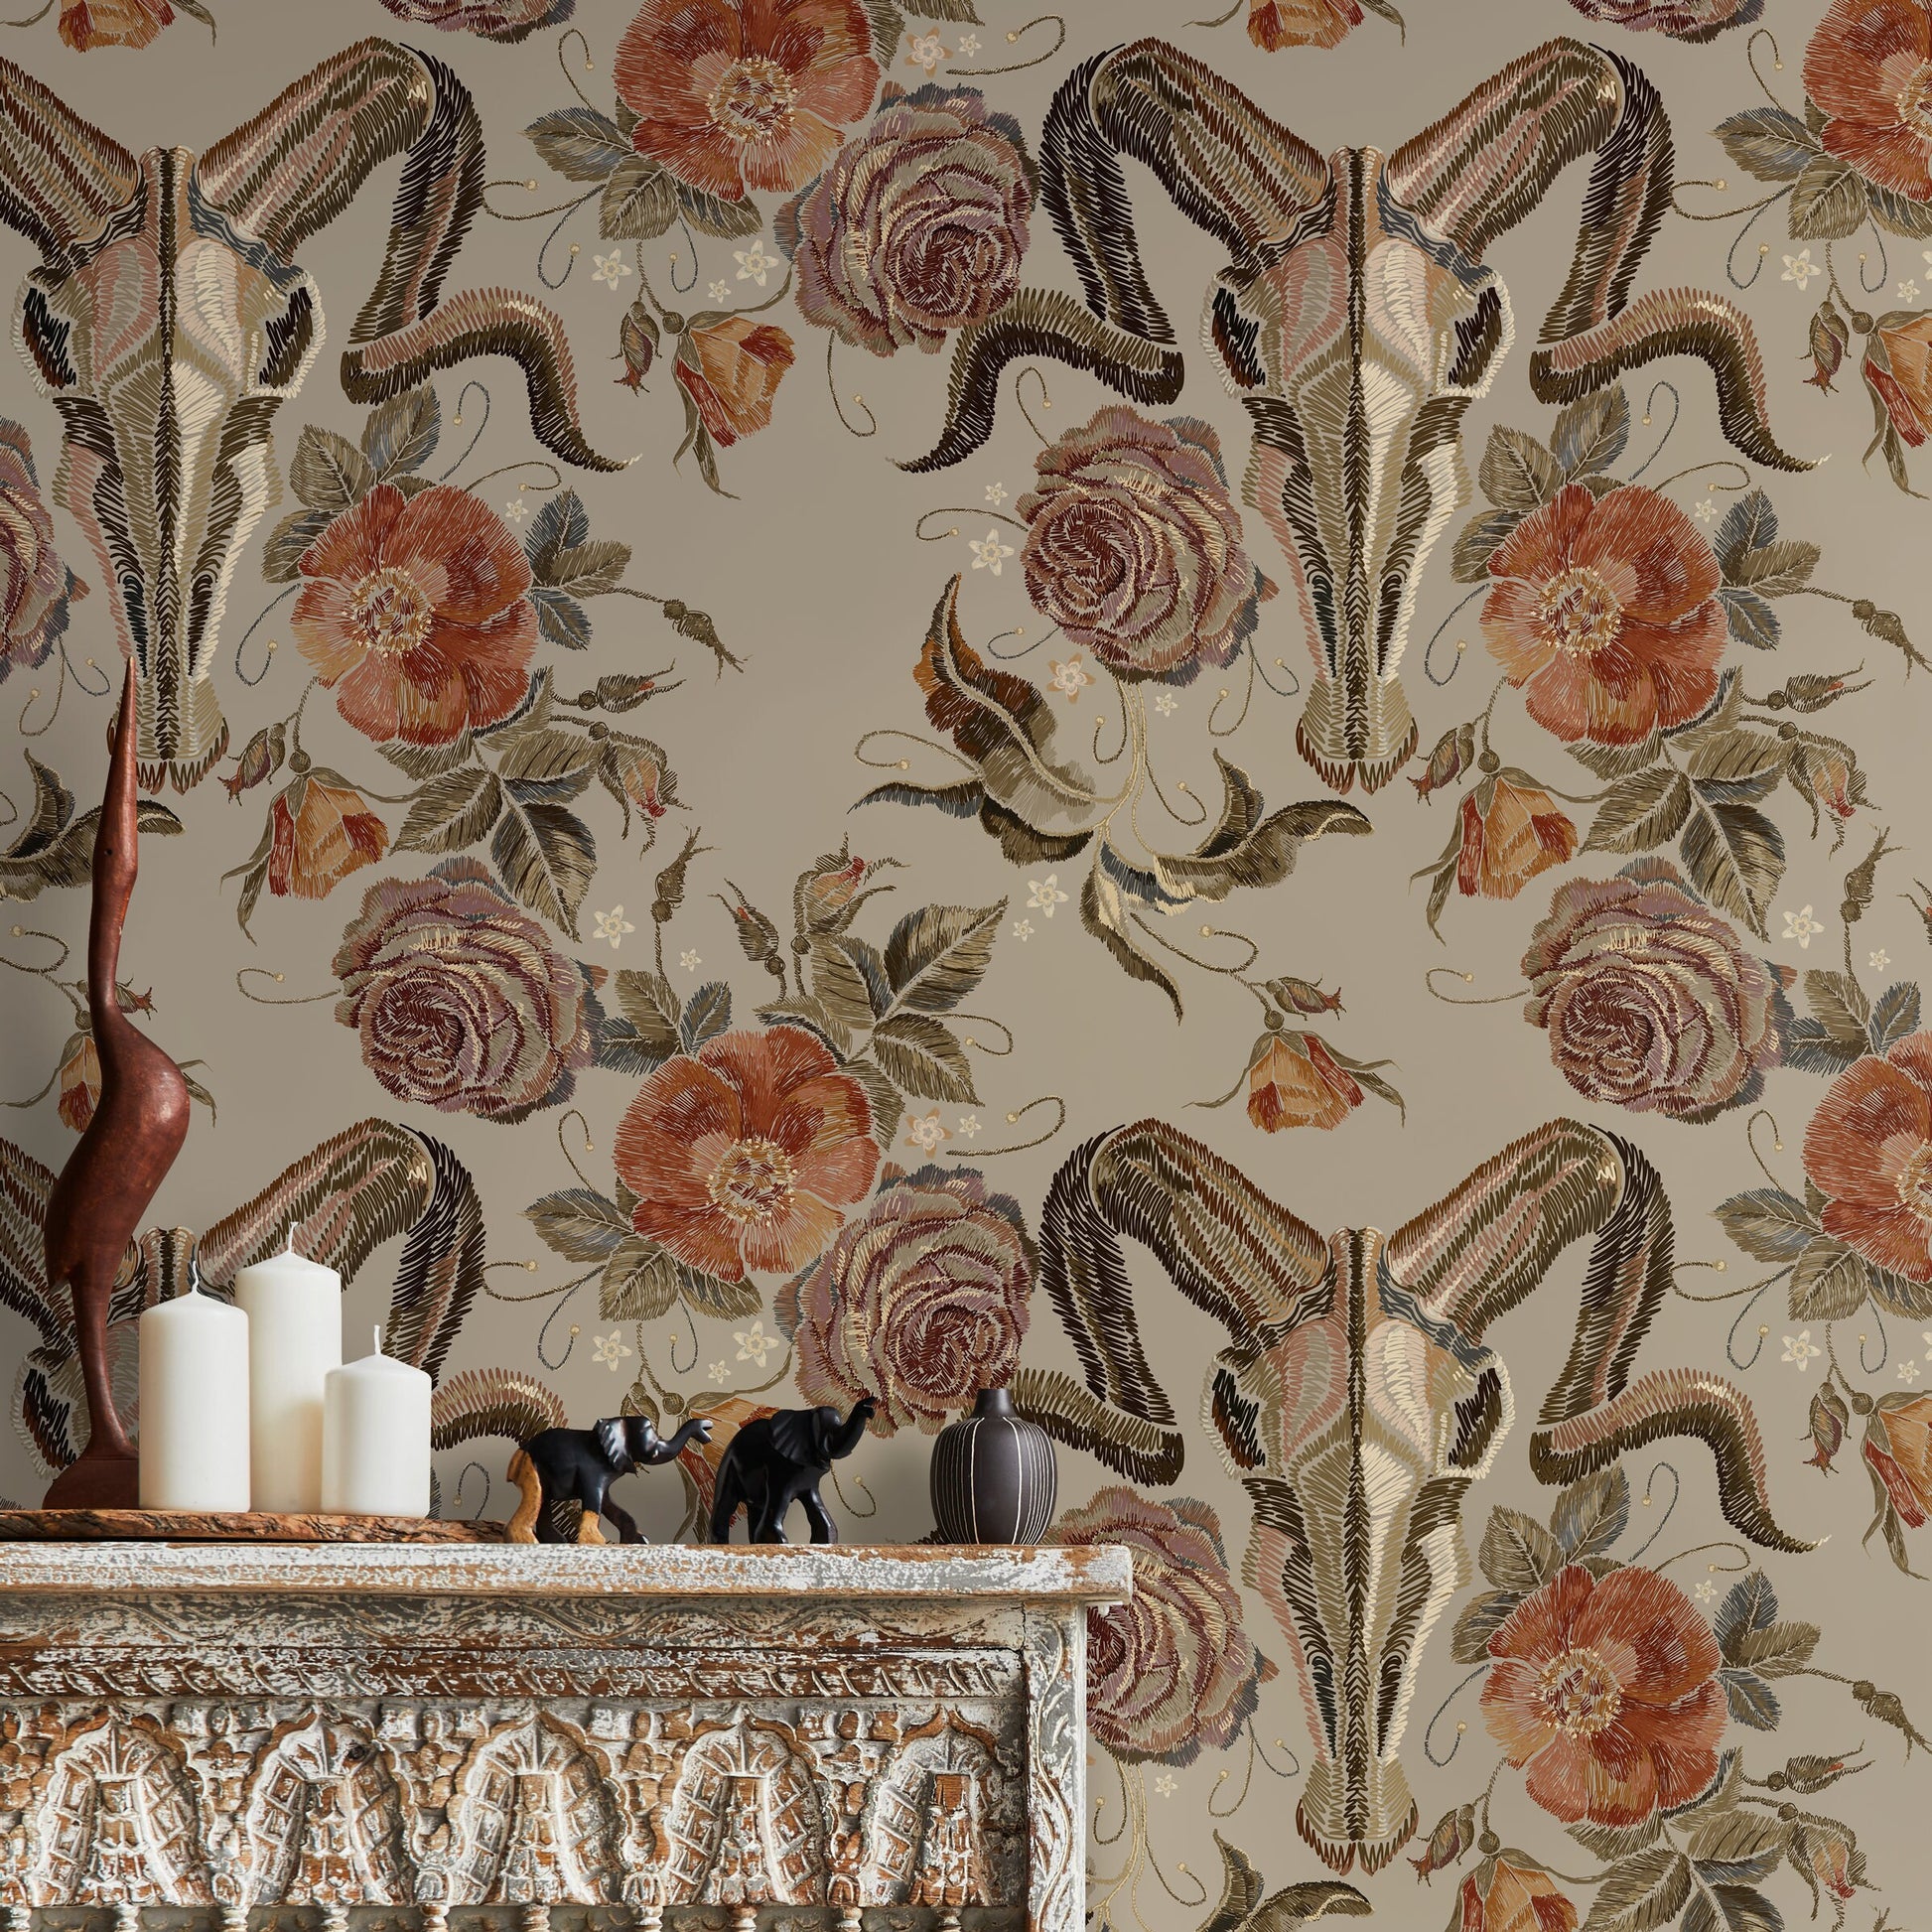 Goat Skull Wallpaper Vintage Floral Wallpaper Peel and Stick and Traditional Wallpaper - D887